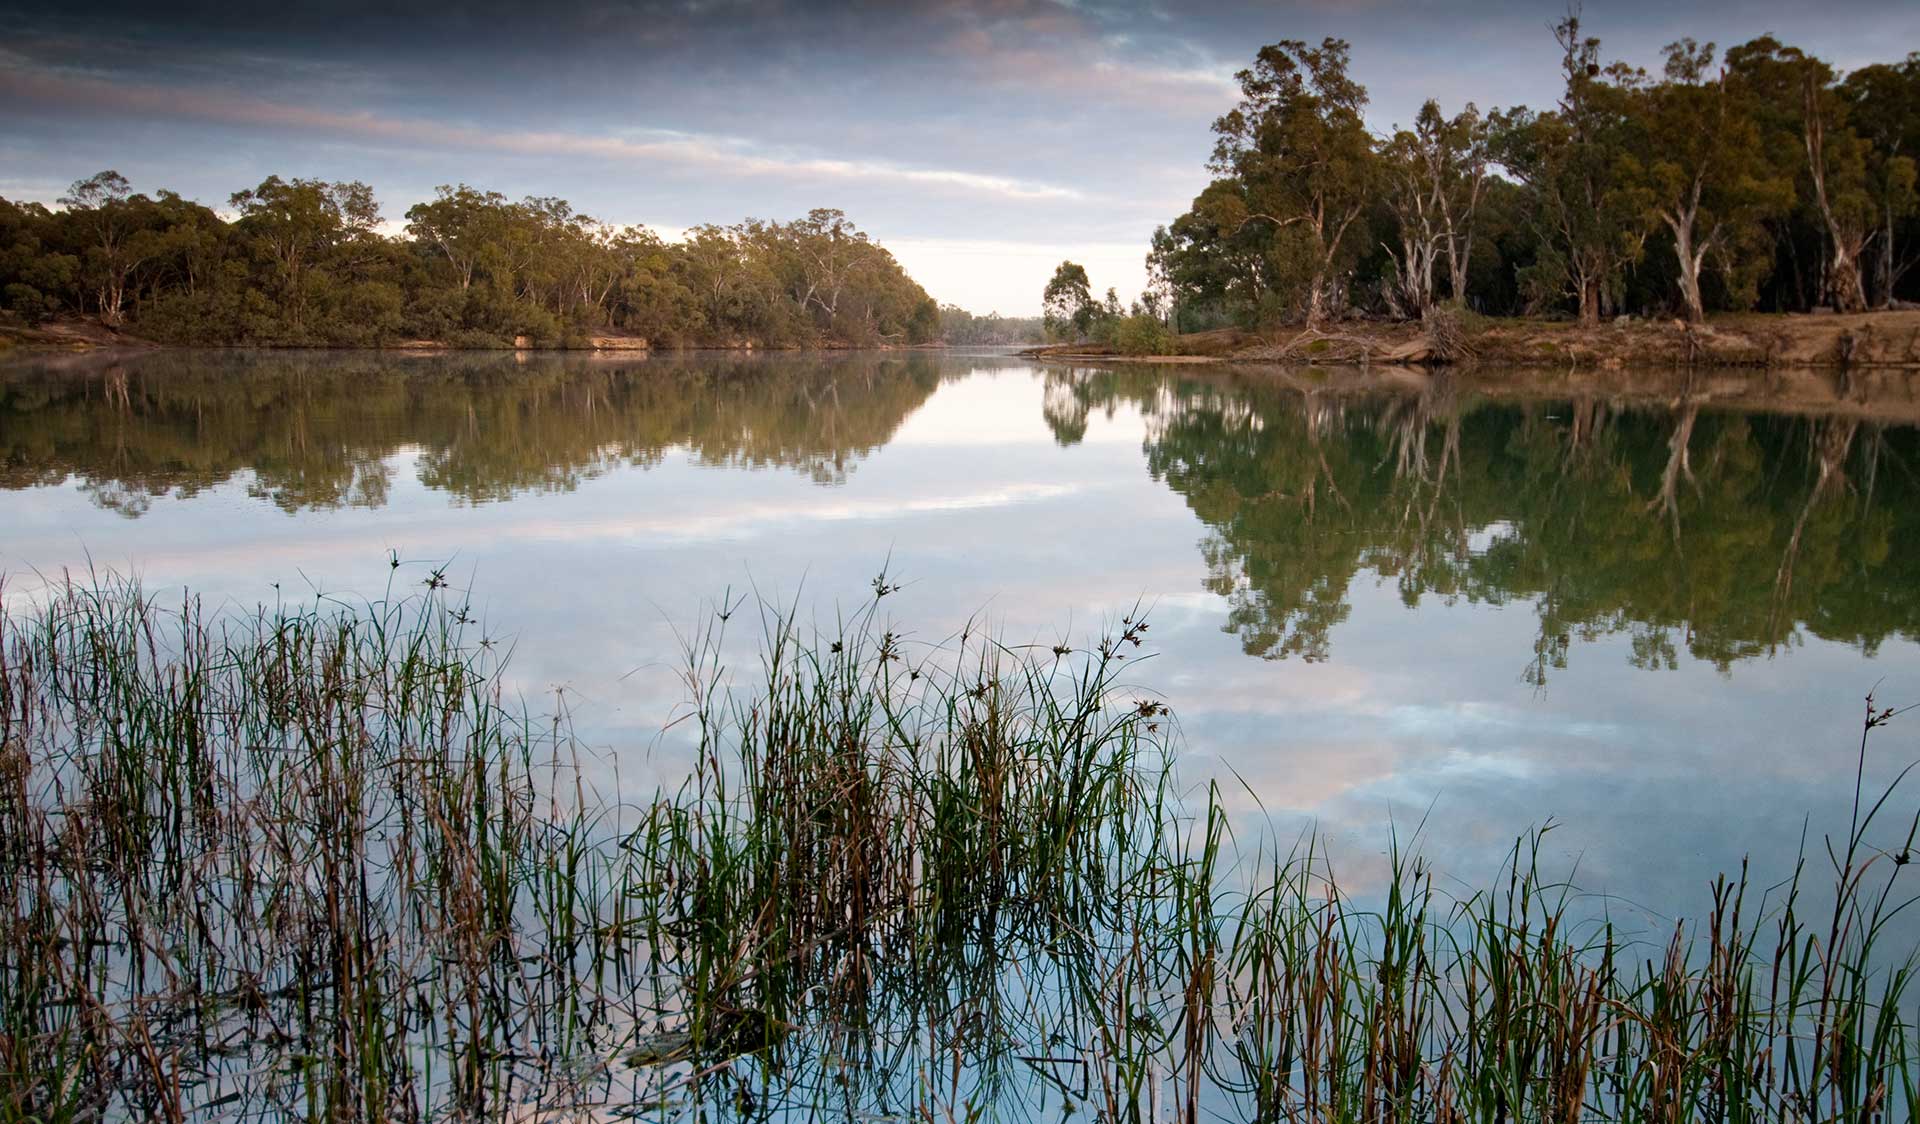 Wallpolla Island in the Murray Sunset National Park.